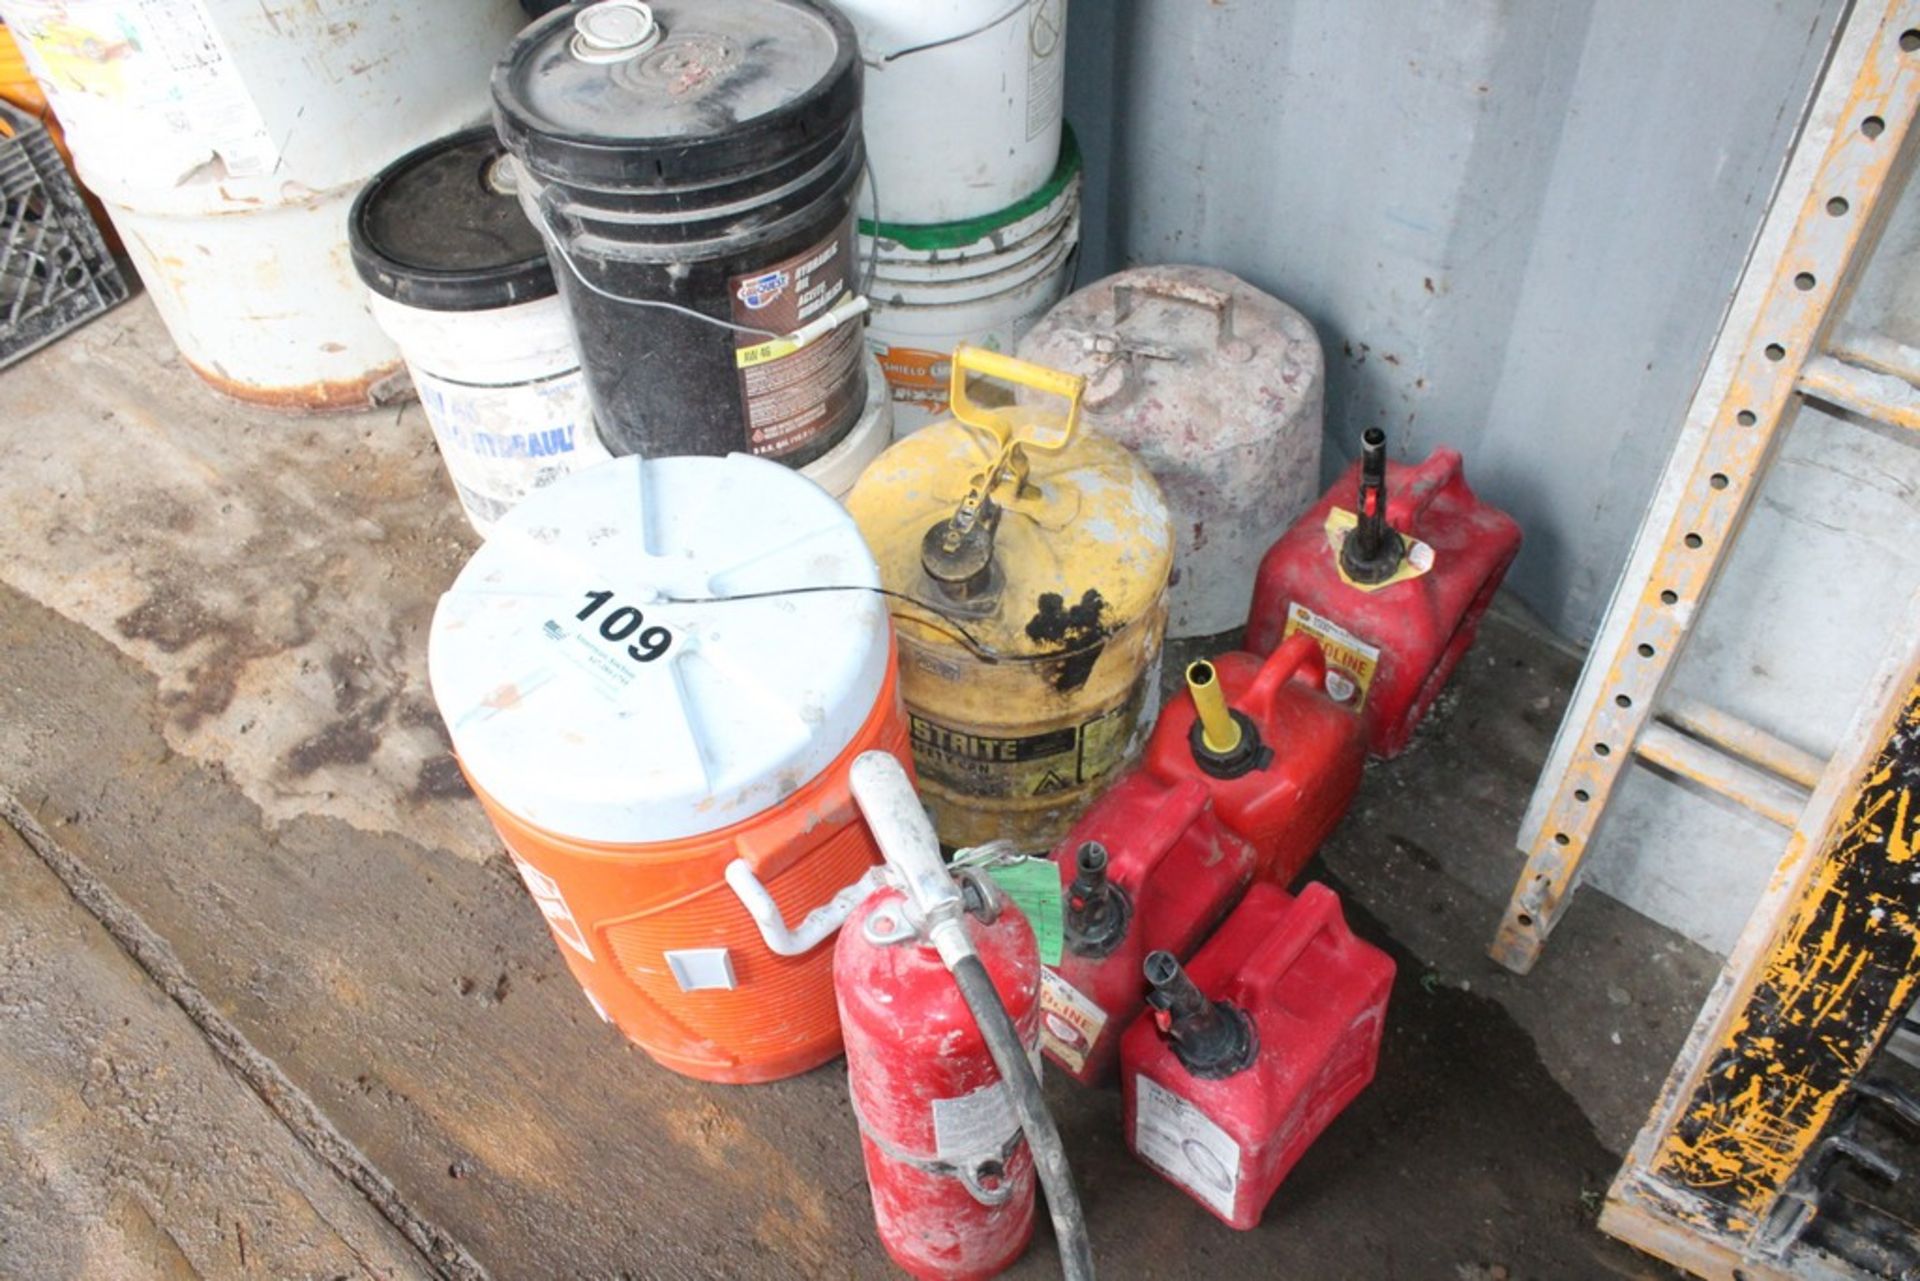 ASSORTED GAS CANS, FIRE EXTINGUISHERS, AND COOLER